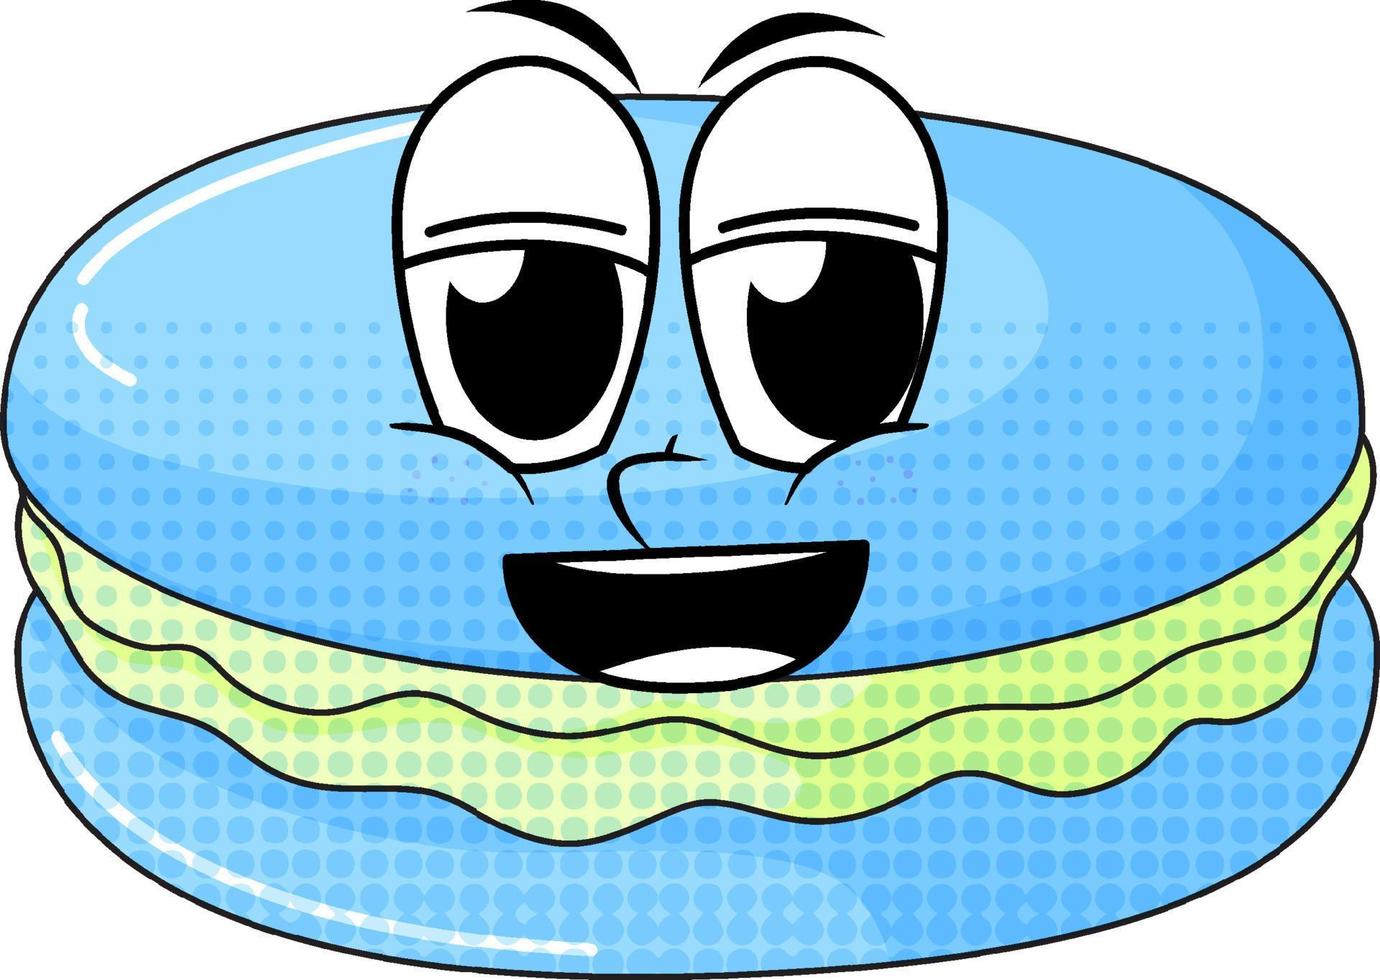 Blue macaron with happy face vector